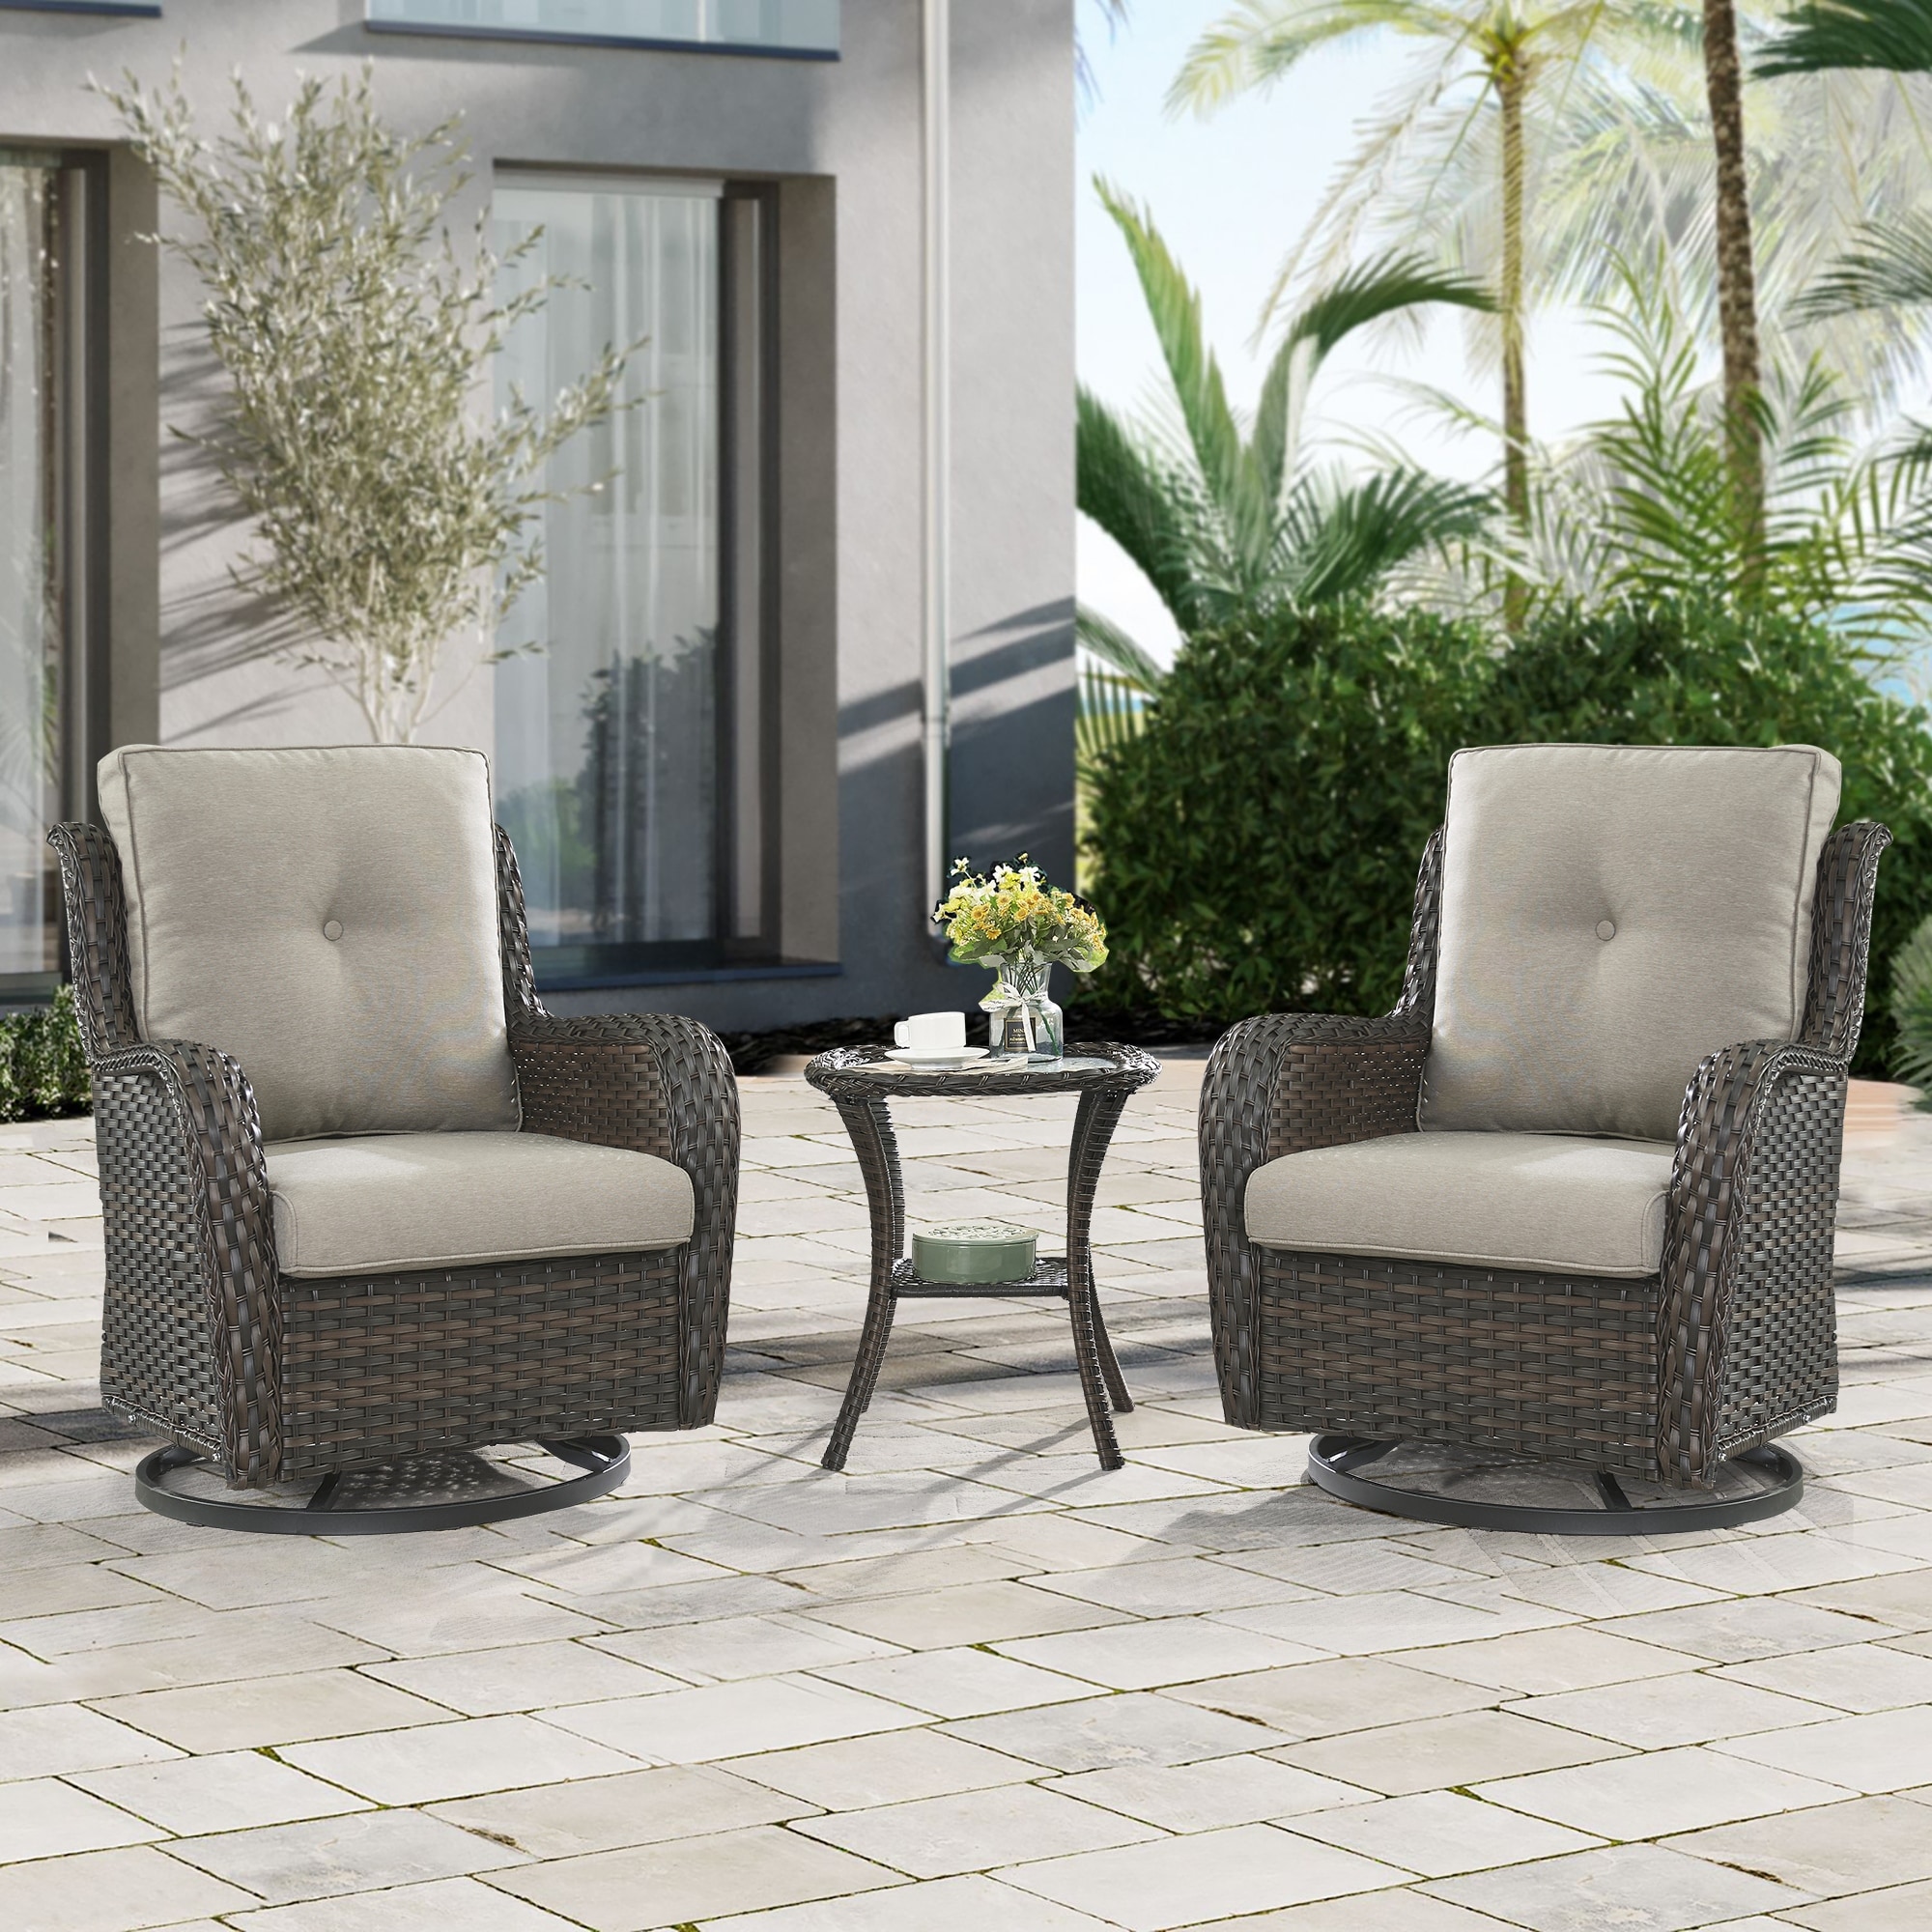 3 Piece Outdoor Wicker Swivel Rocker Patio Set With Cushion and Table